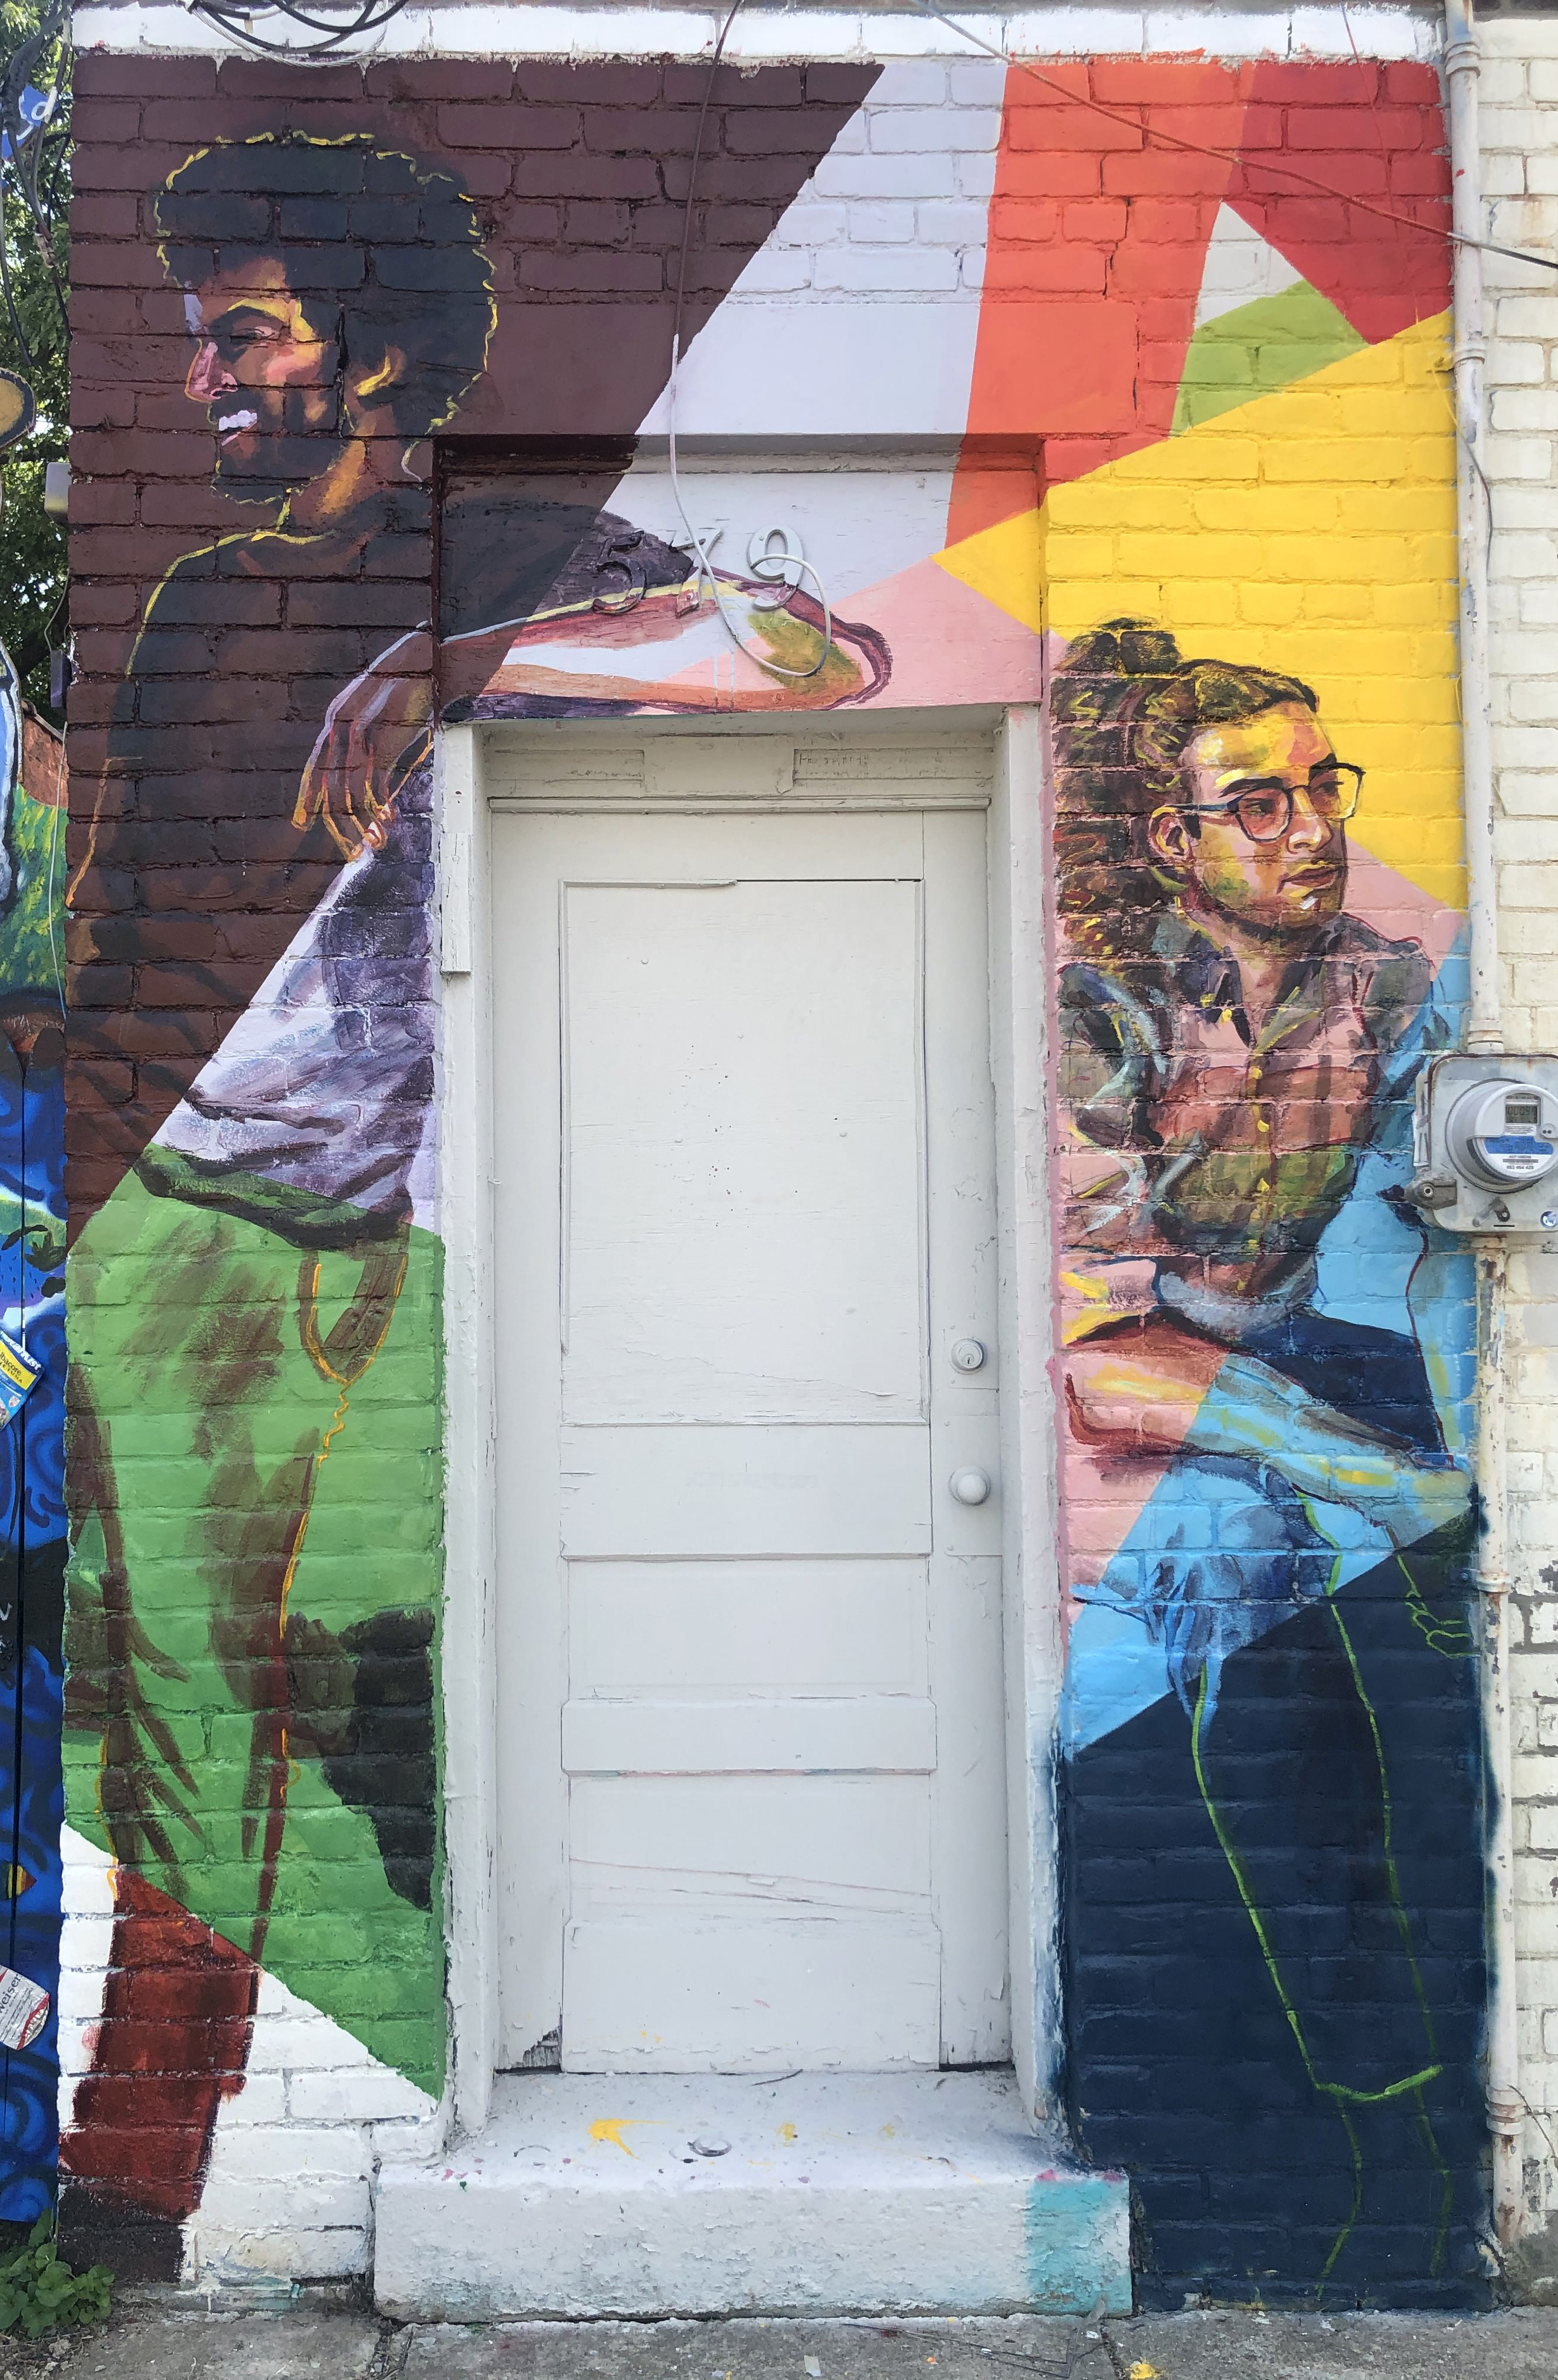 "Ahmed and Max" (934 Outdoor Gallery)